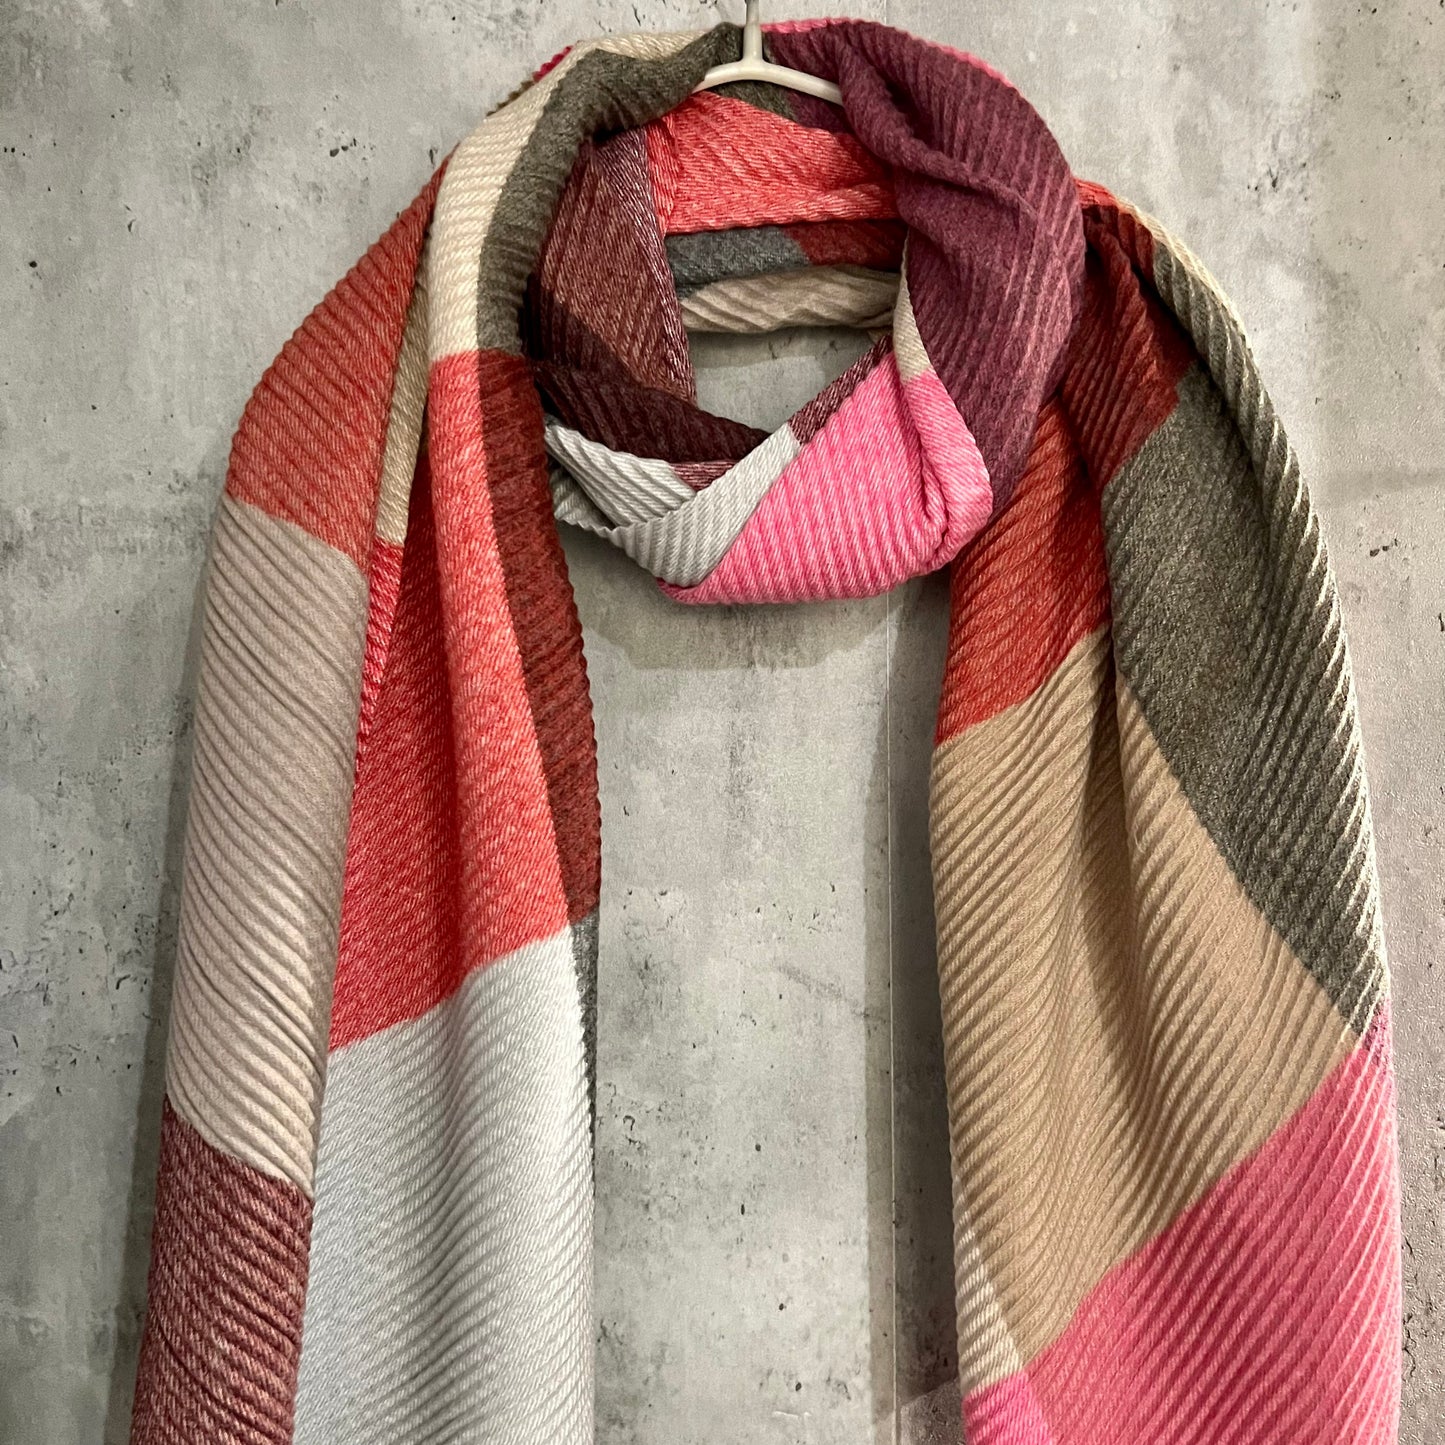 Block Pattern Pink Beige Grey Cashmere Blend Scarf/Autumn Winter Scarf/Gifts For Mum/Gifts For Her Birthday Christmas/Scarf Women